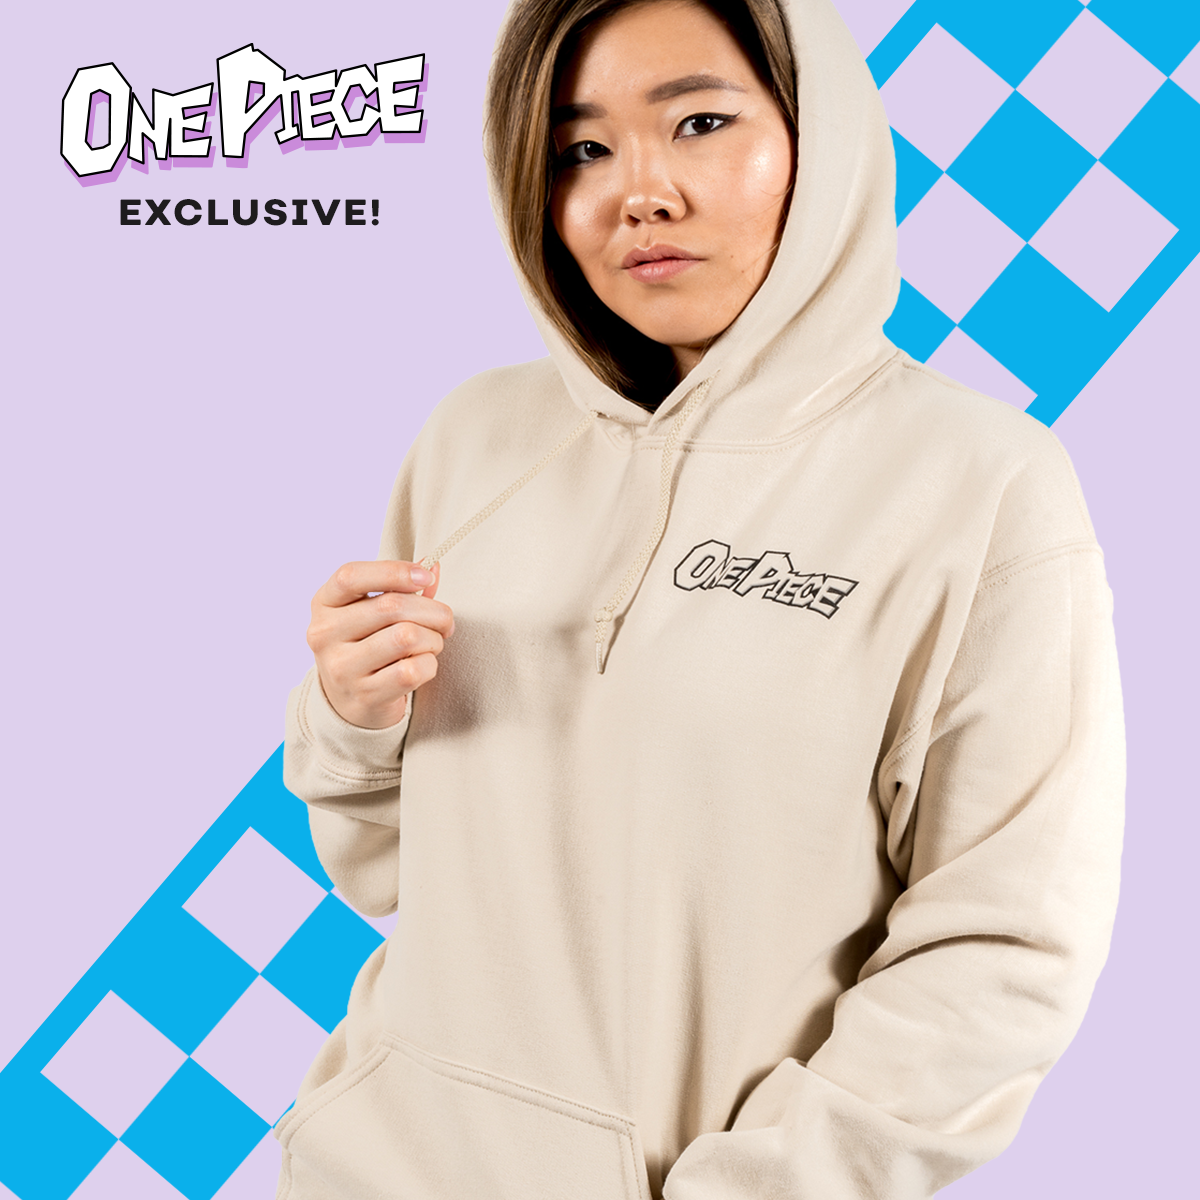 One Piece - Nico Robin Checker Hoodie - Crunchyroll Exclusive! image count 1